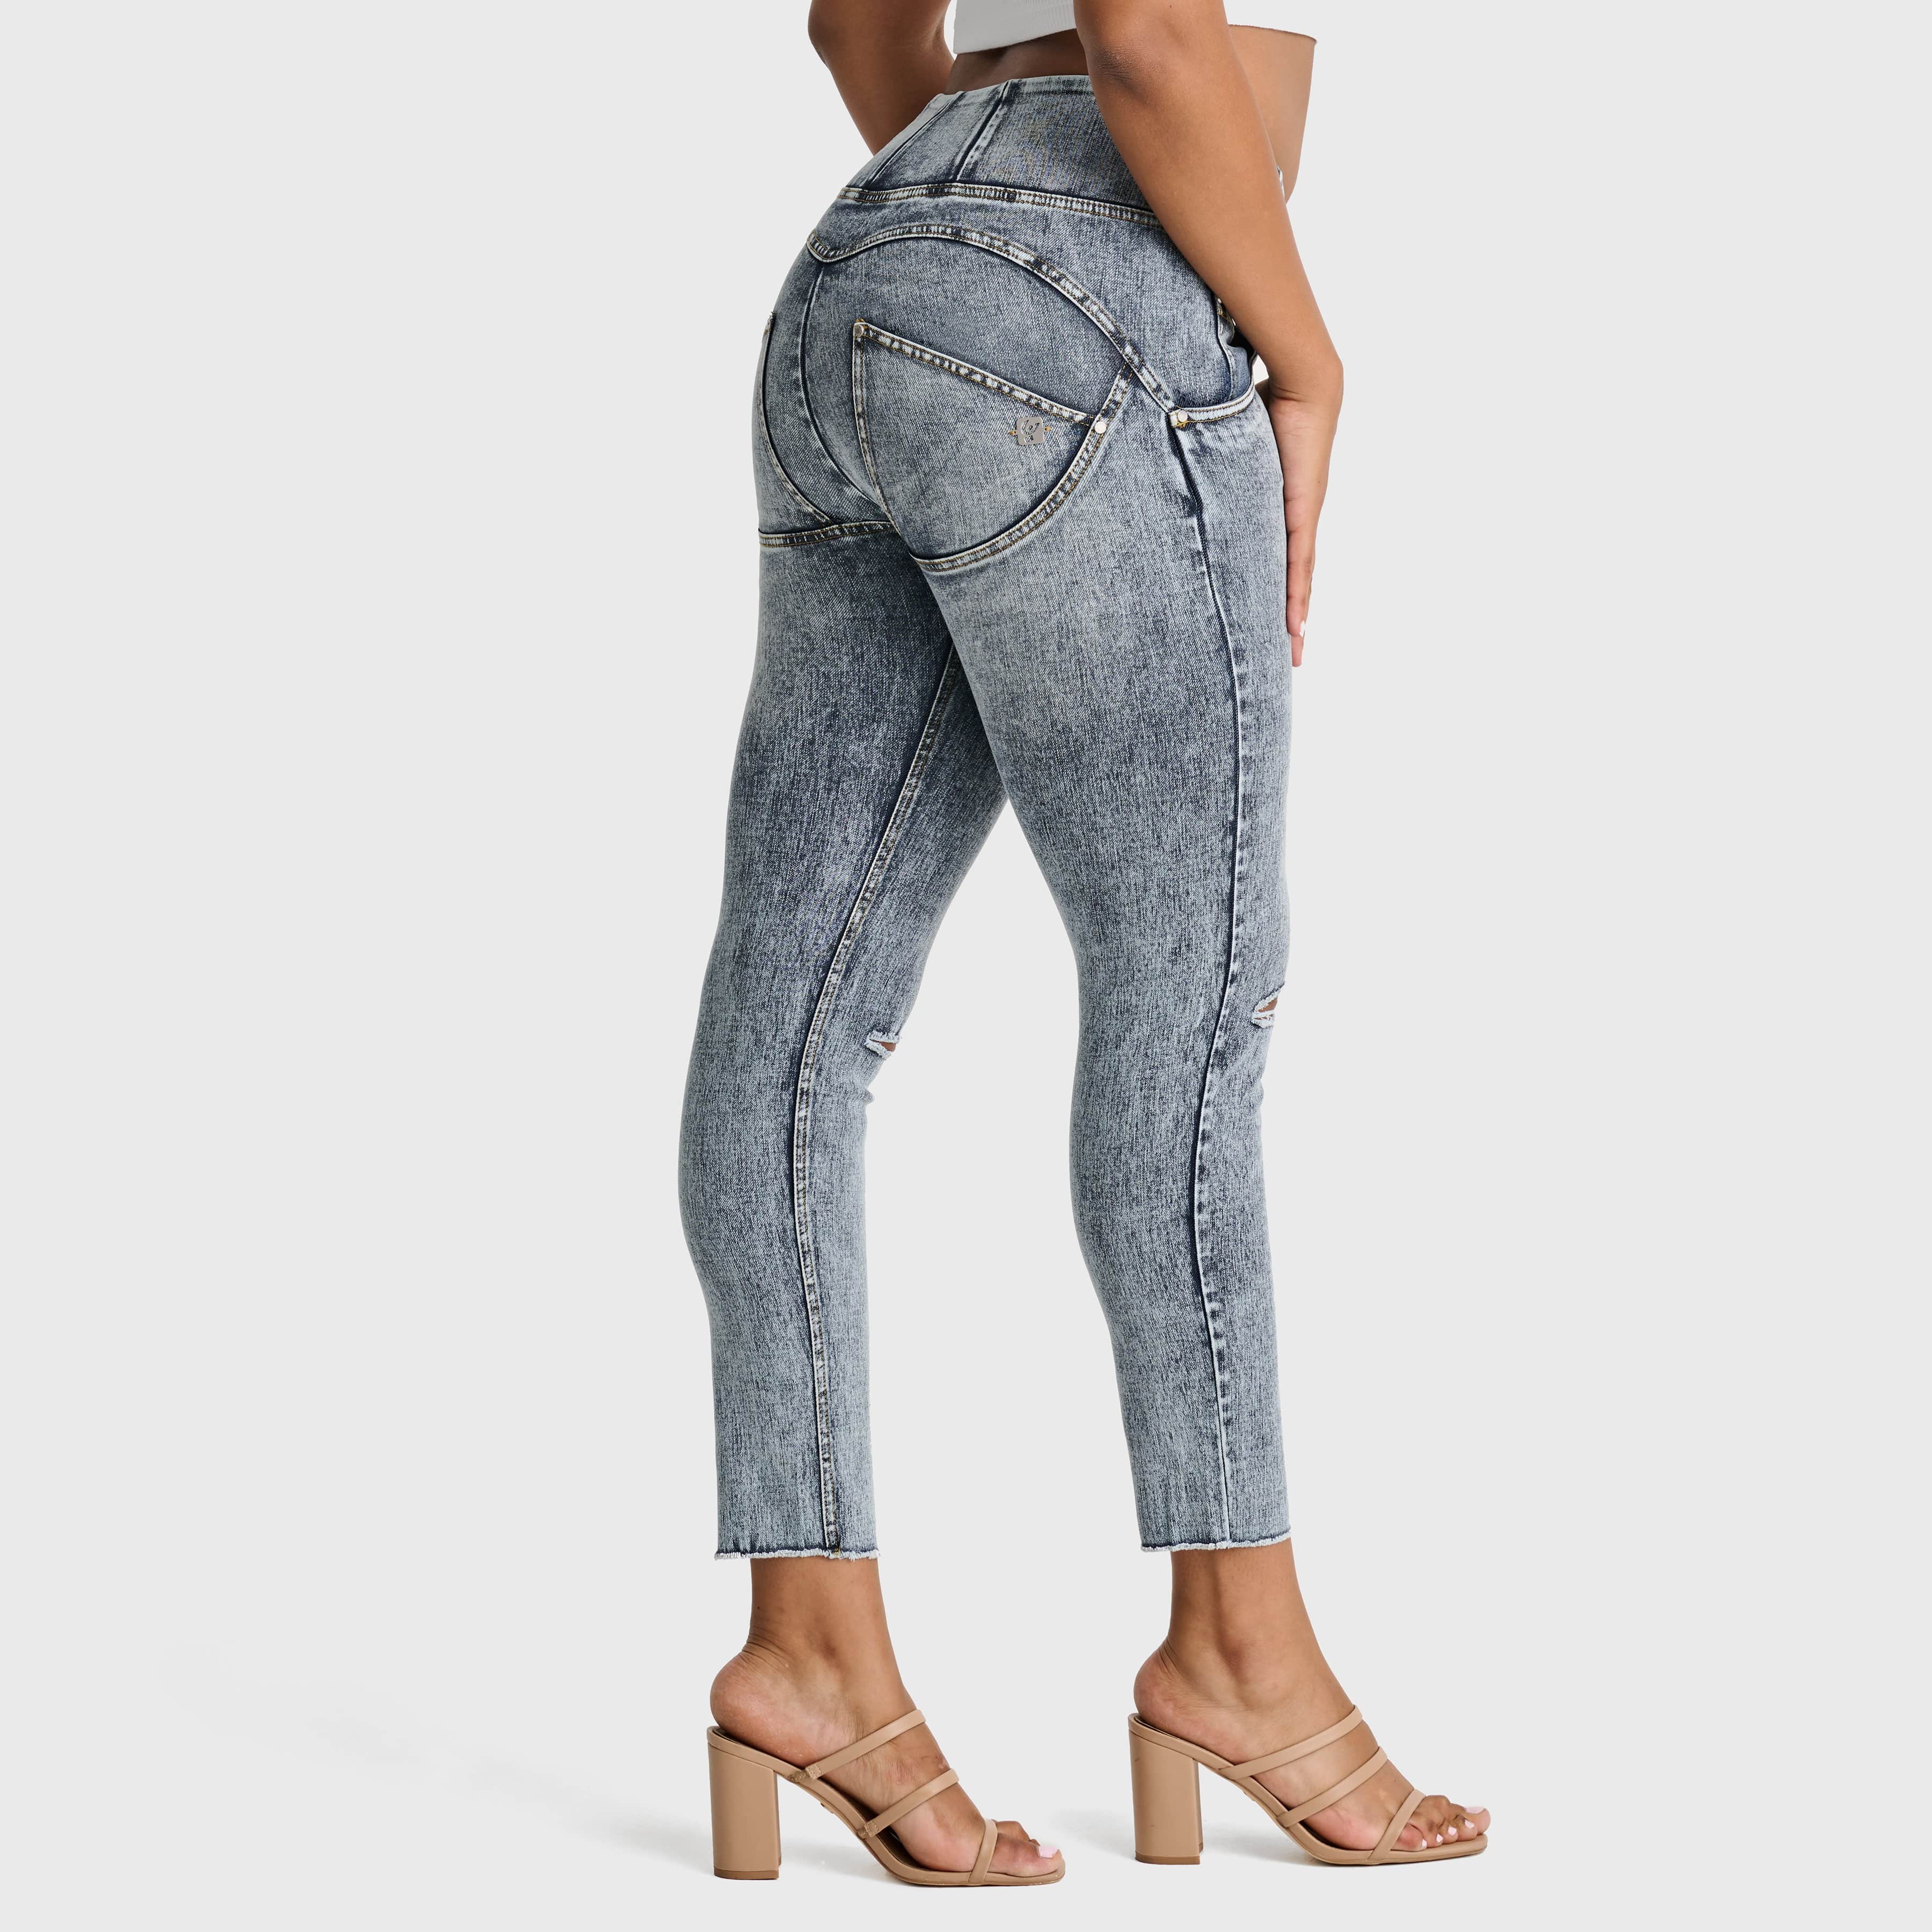 WR.UP® Snug Ripped Jeans - High Waisted - Petite Length - Blue Stonewash + Yellow Stitching 2